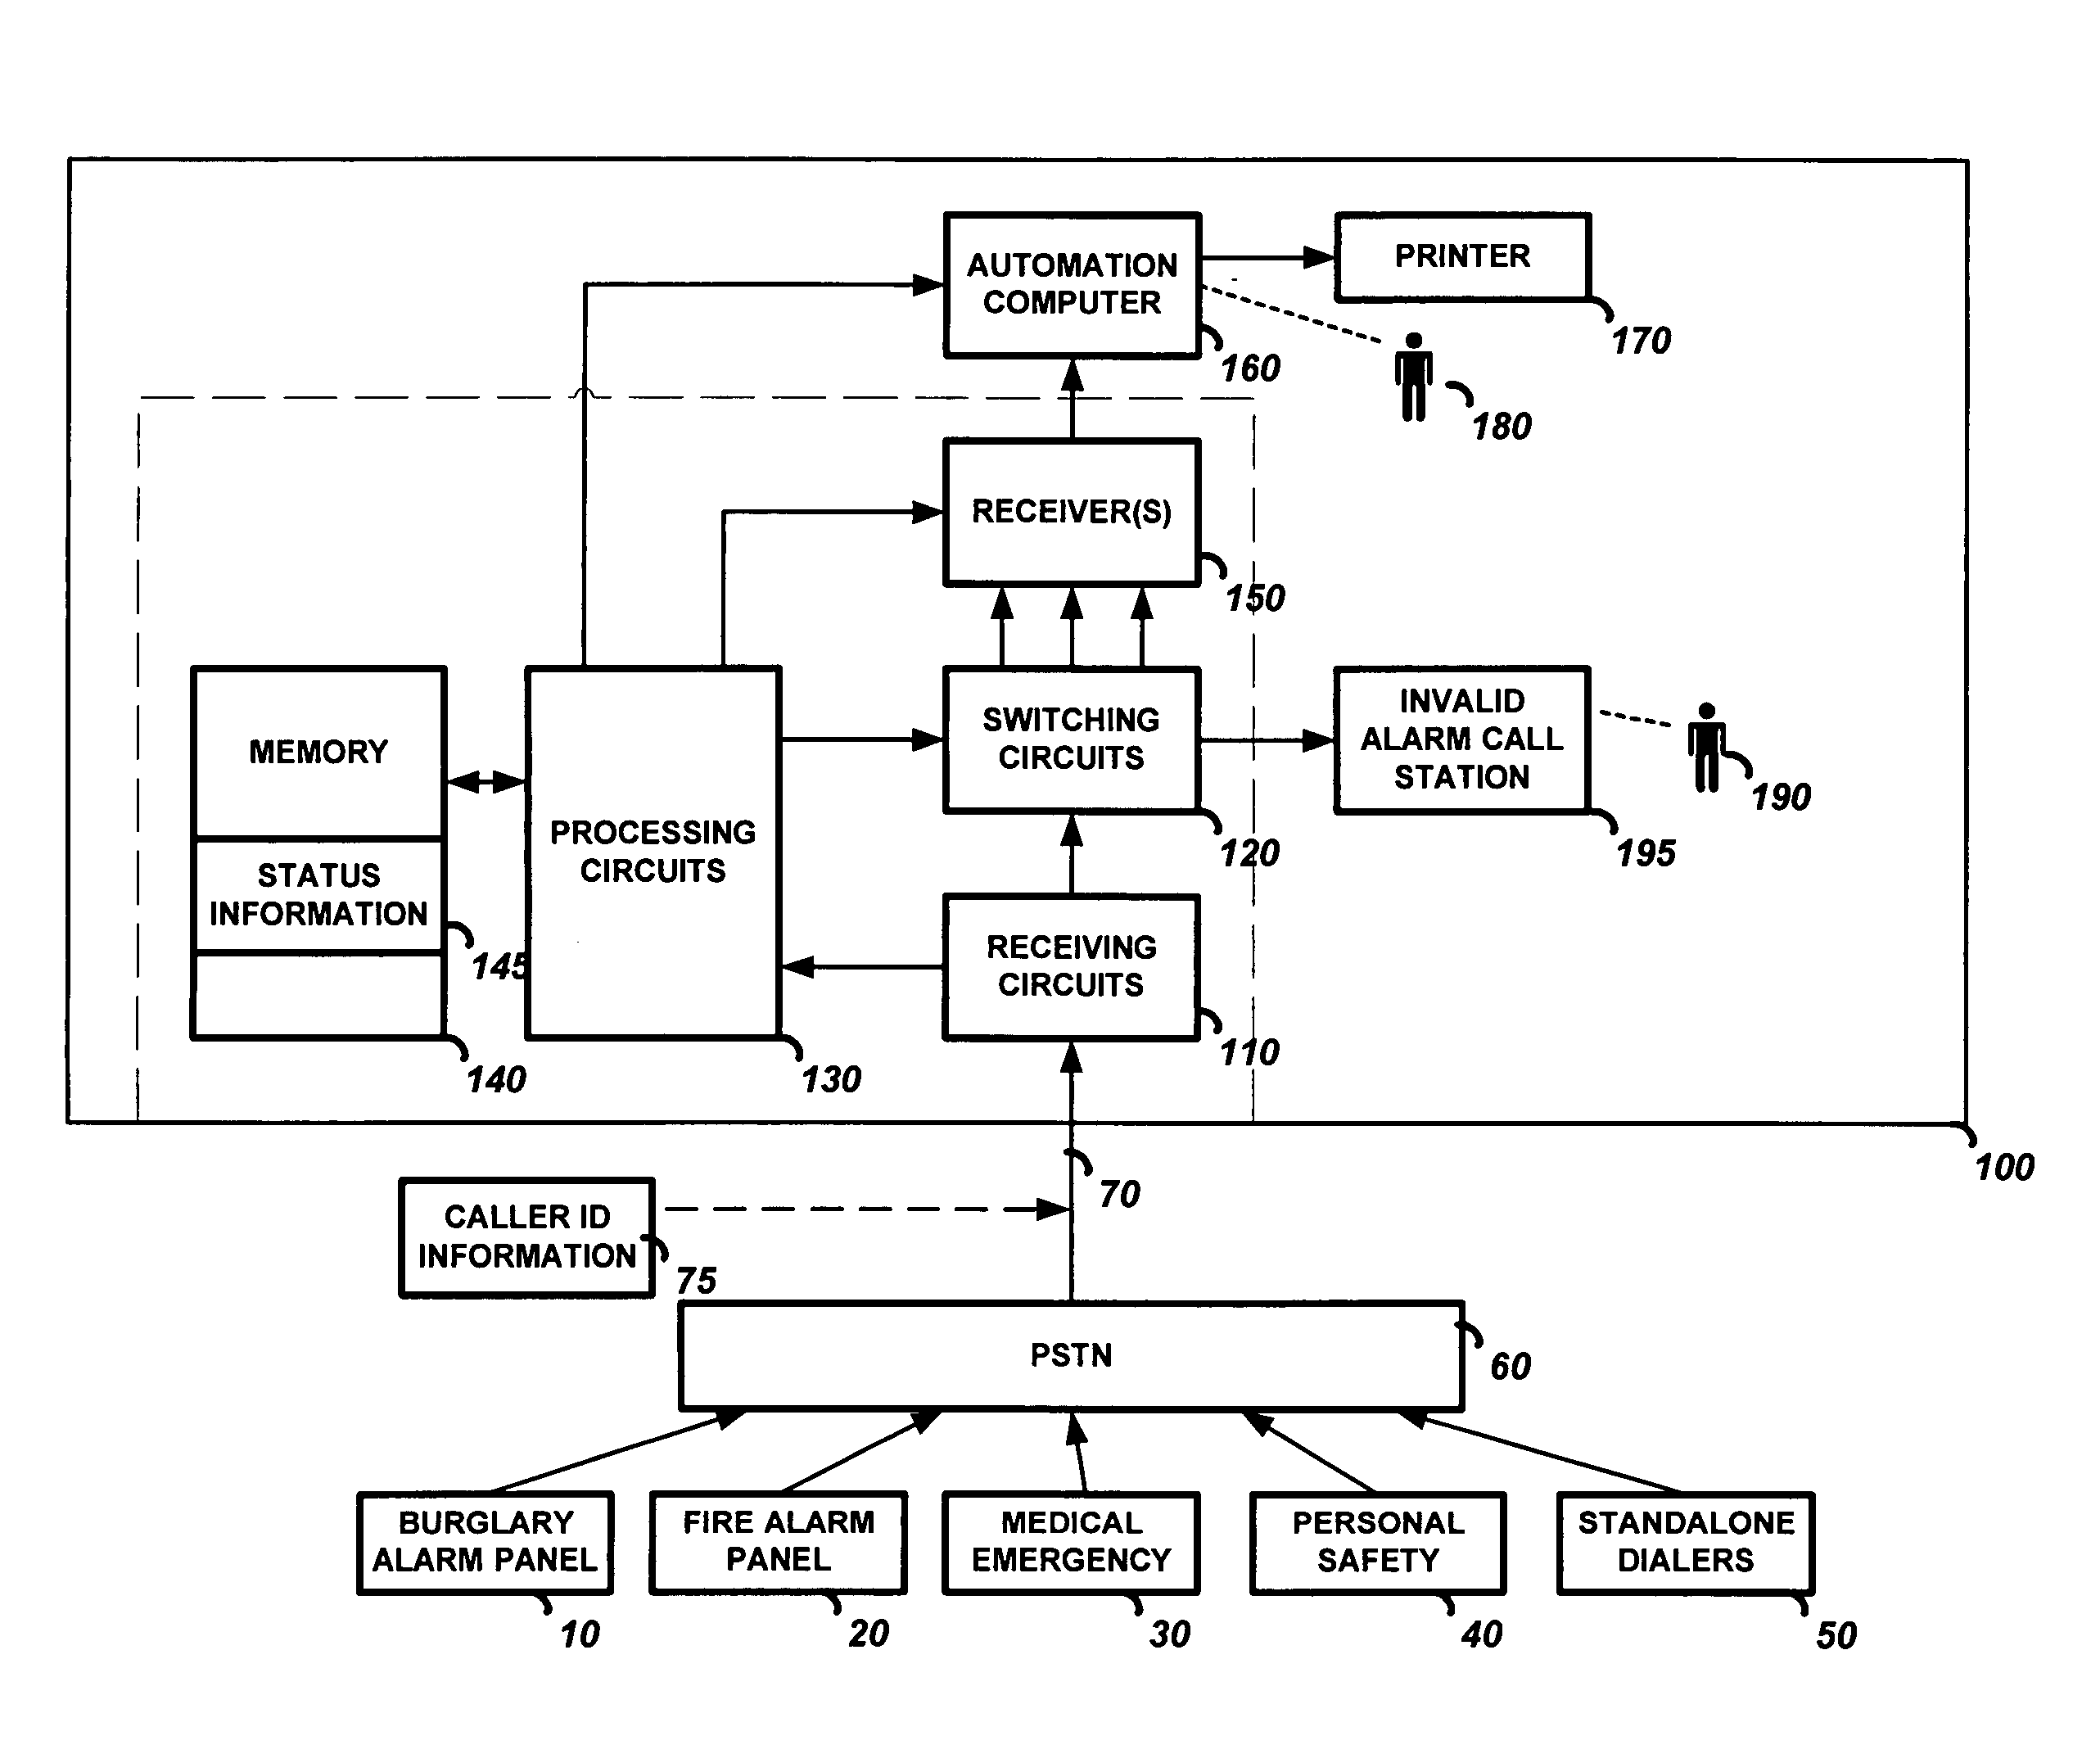 Central monitoring station with method to process call based on call source identification information